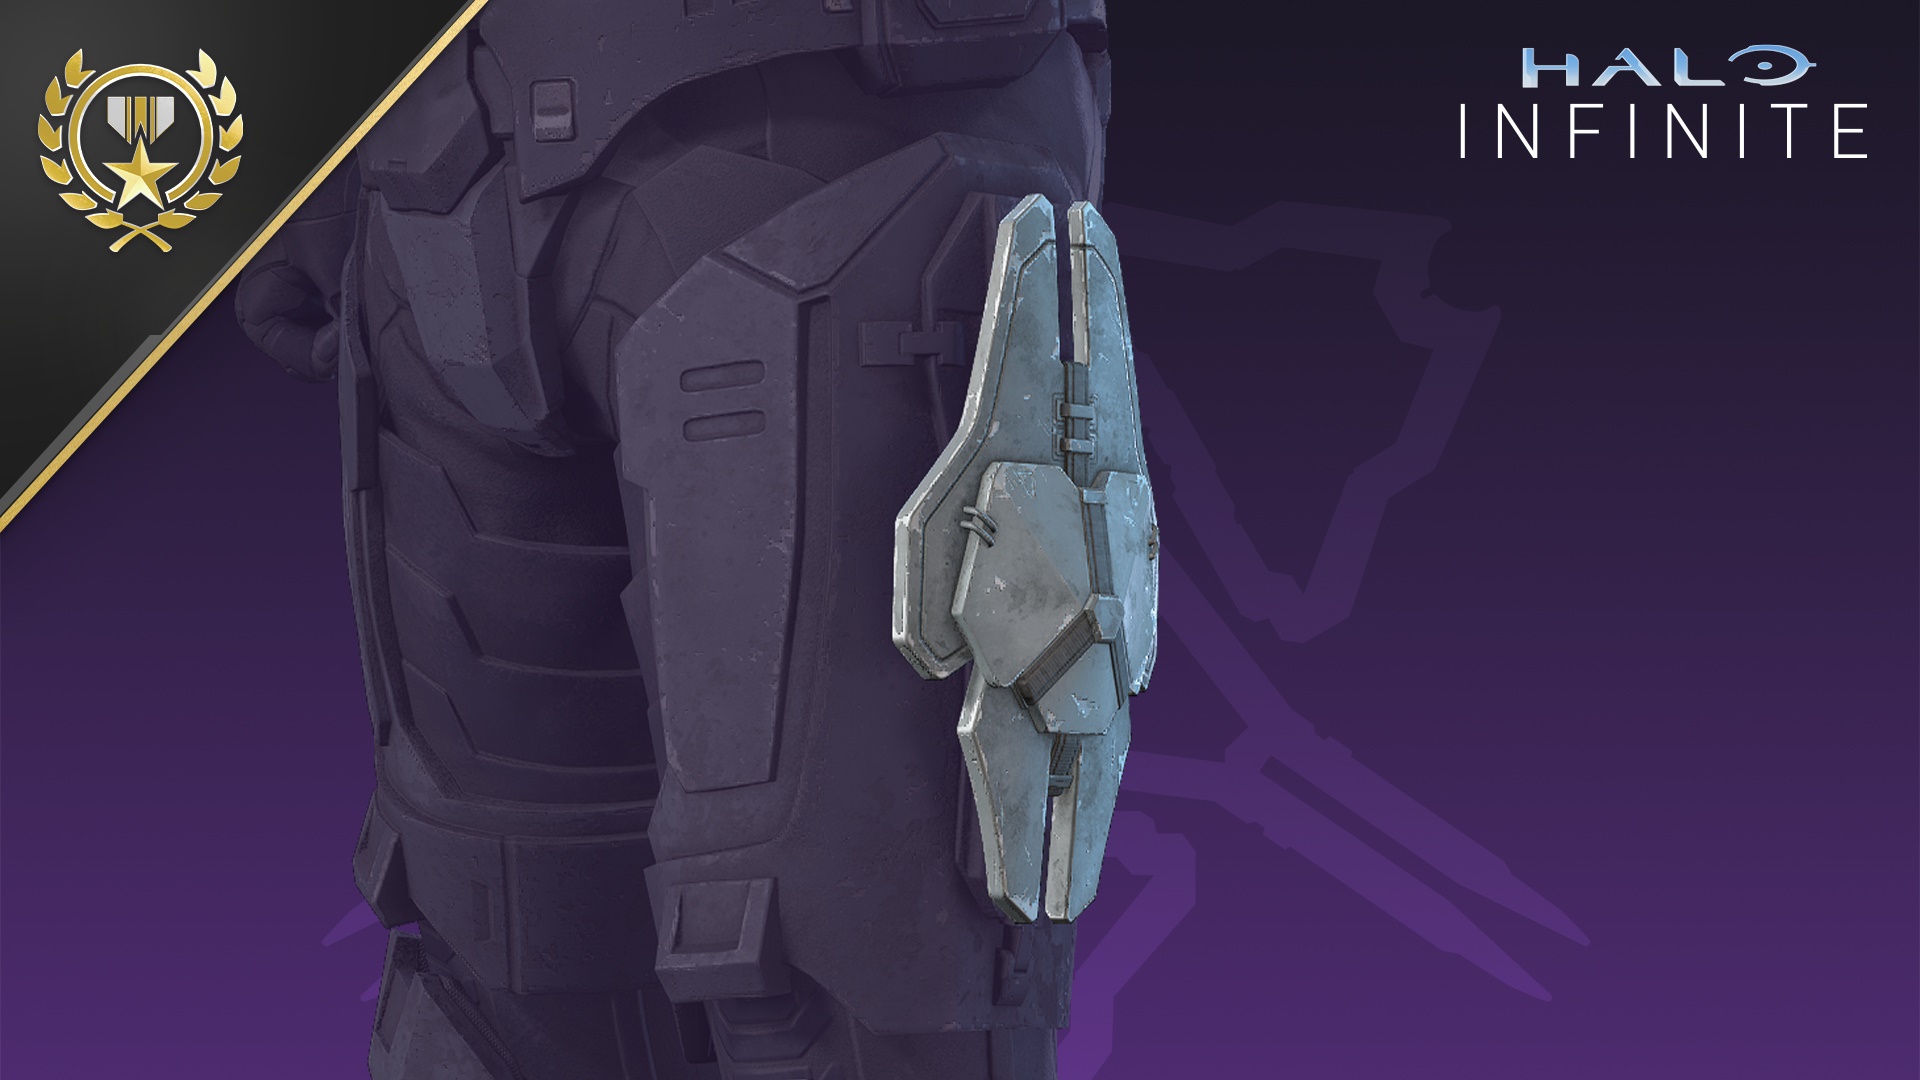 Halo Infinite Image of Scave Patch Ultimate Reward